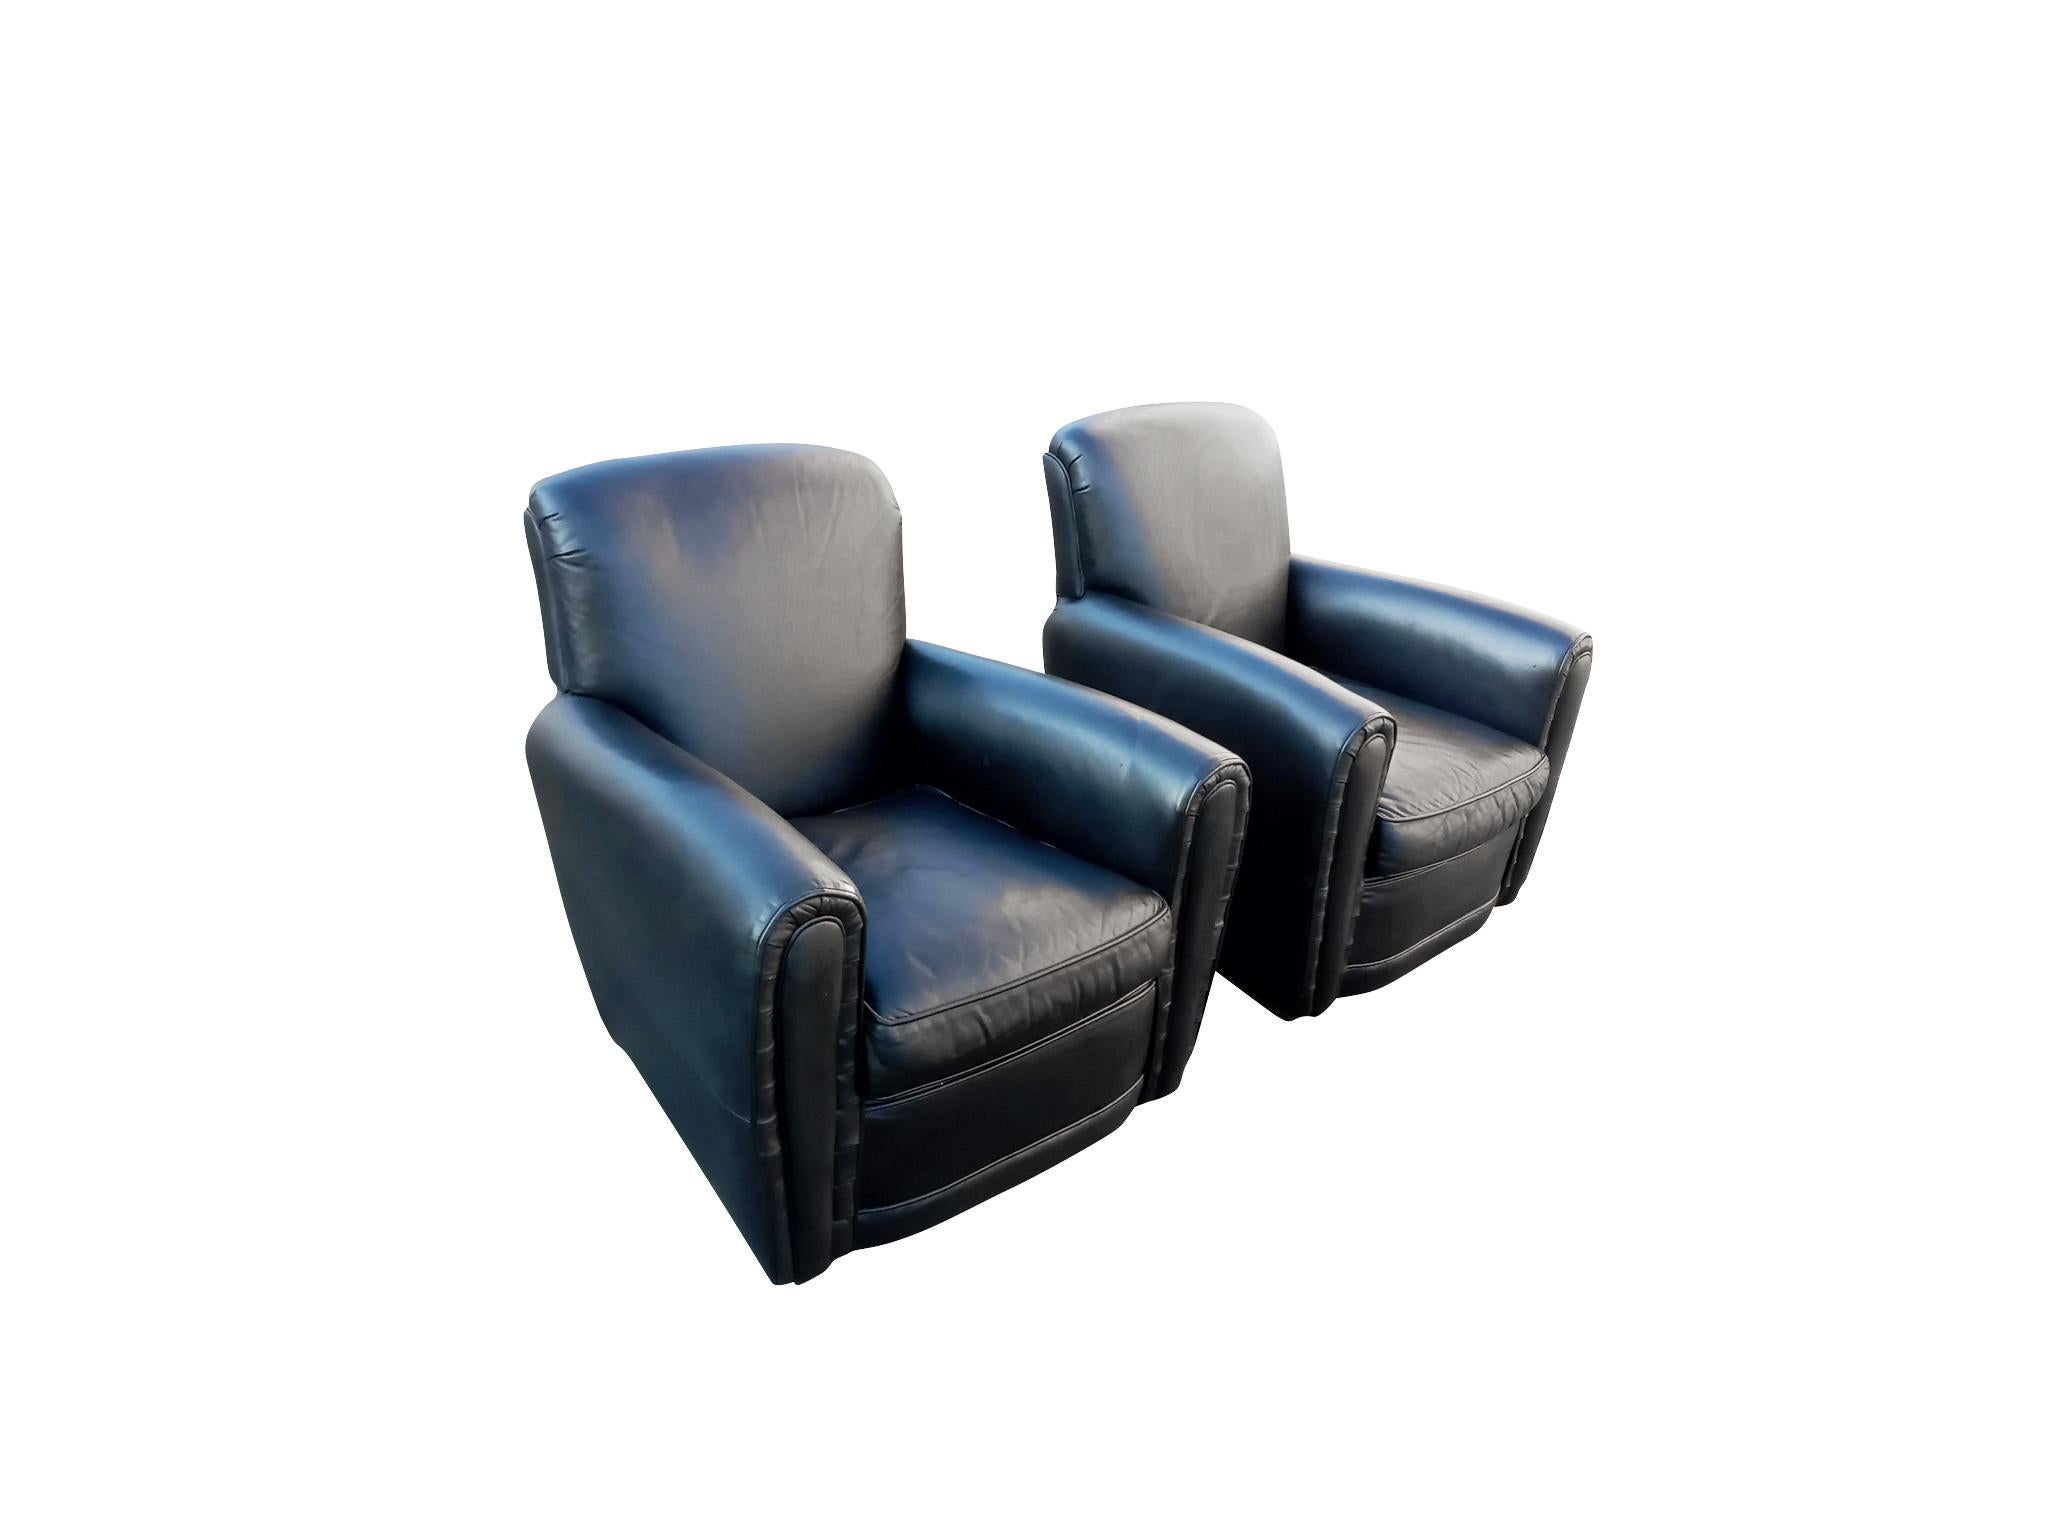 These heirloom quality top grain black leather chairs are as stylish as they are comfortable. Pleated and tailored leather details, wonderful proportions, and superior quality materials and construction, they will not disappoint. The original